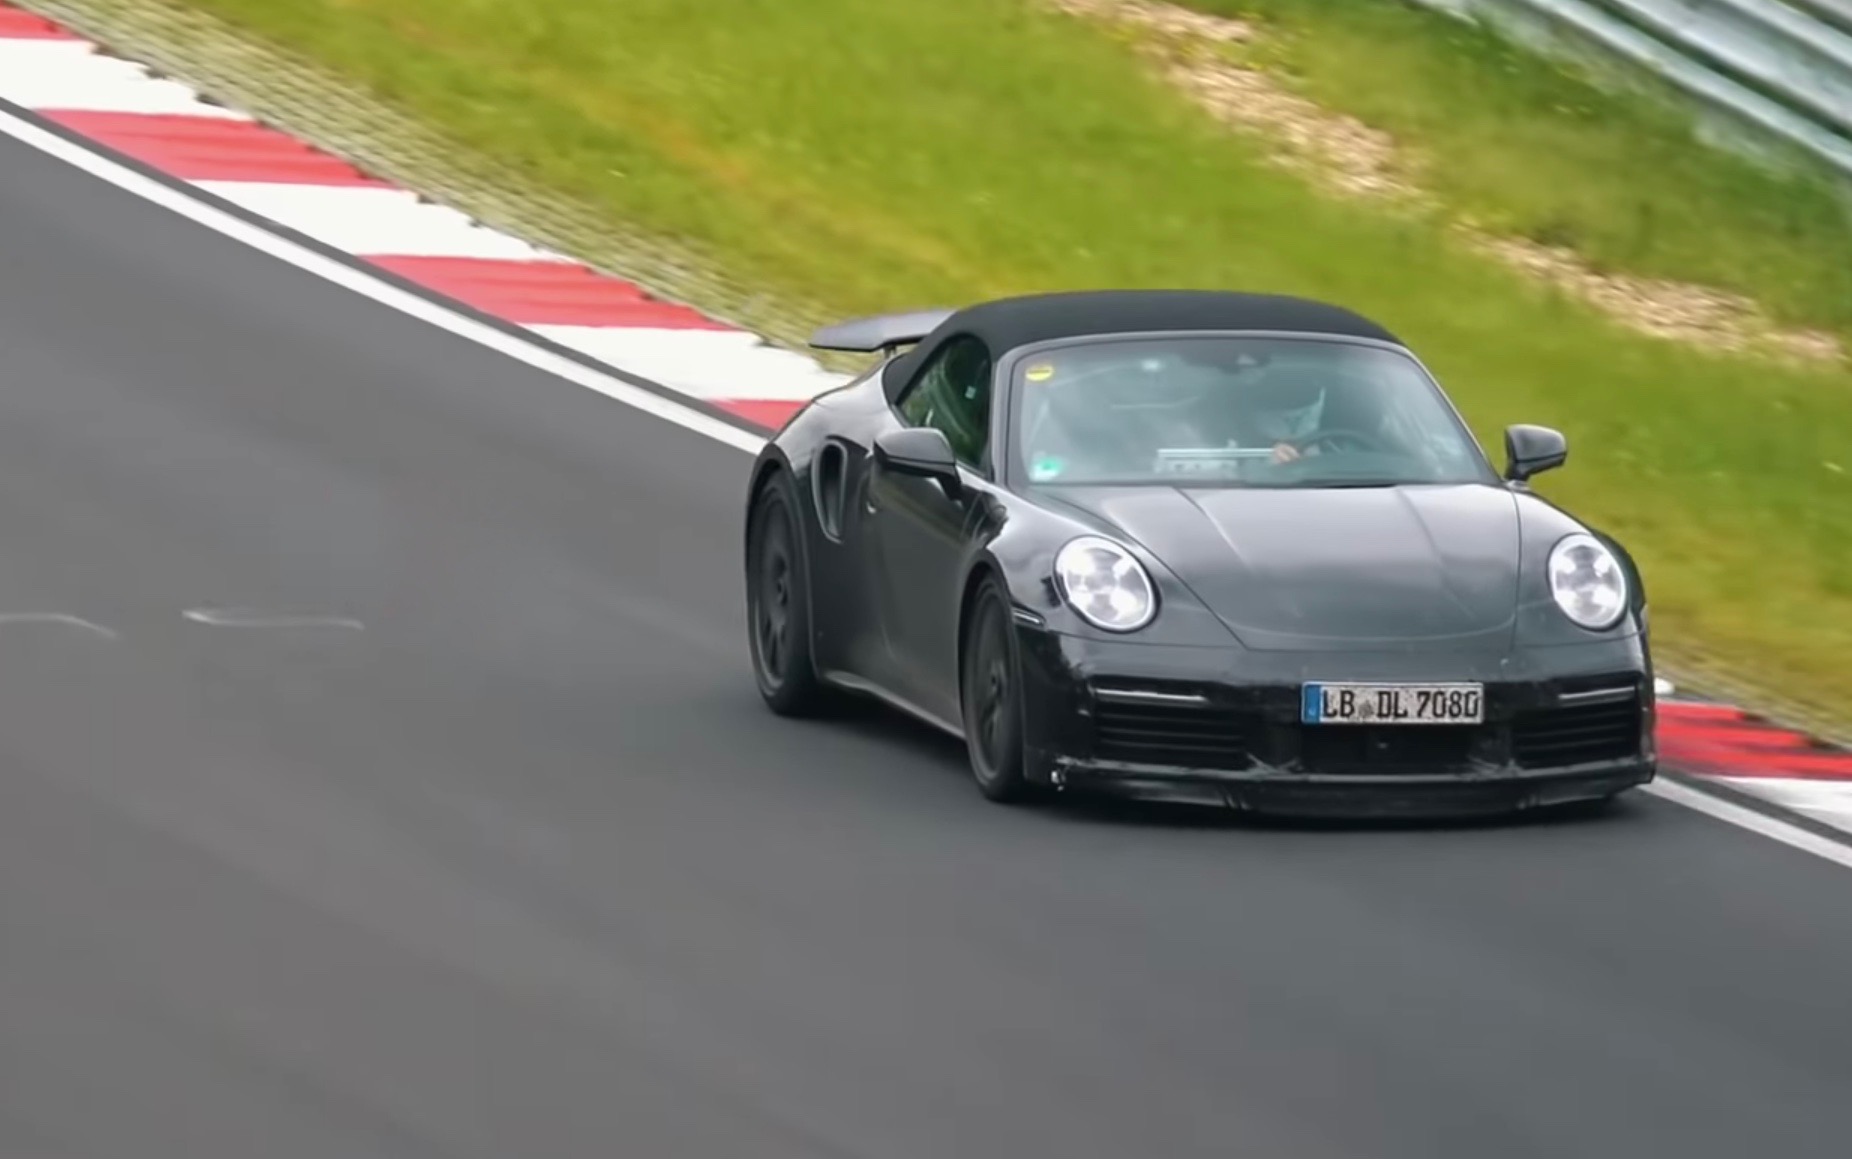 2020 Porsche 911 Turbo ‘992’ convertible spied at Nurburgring (video)